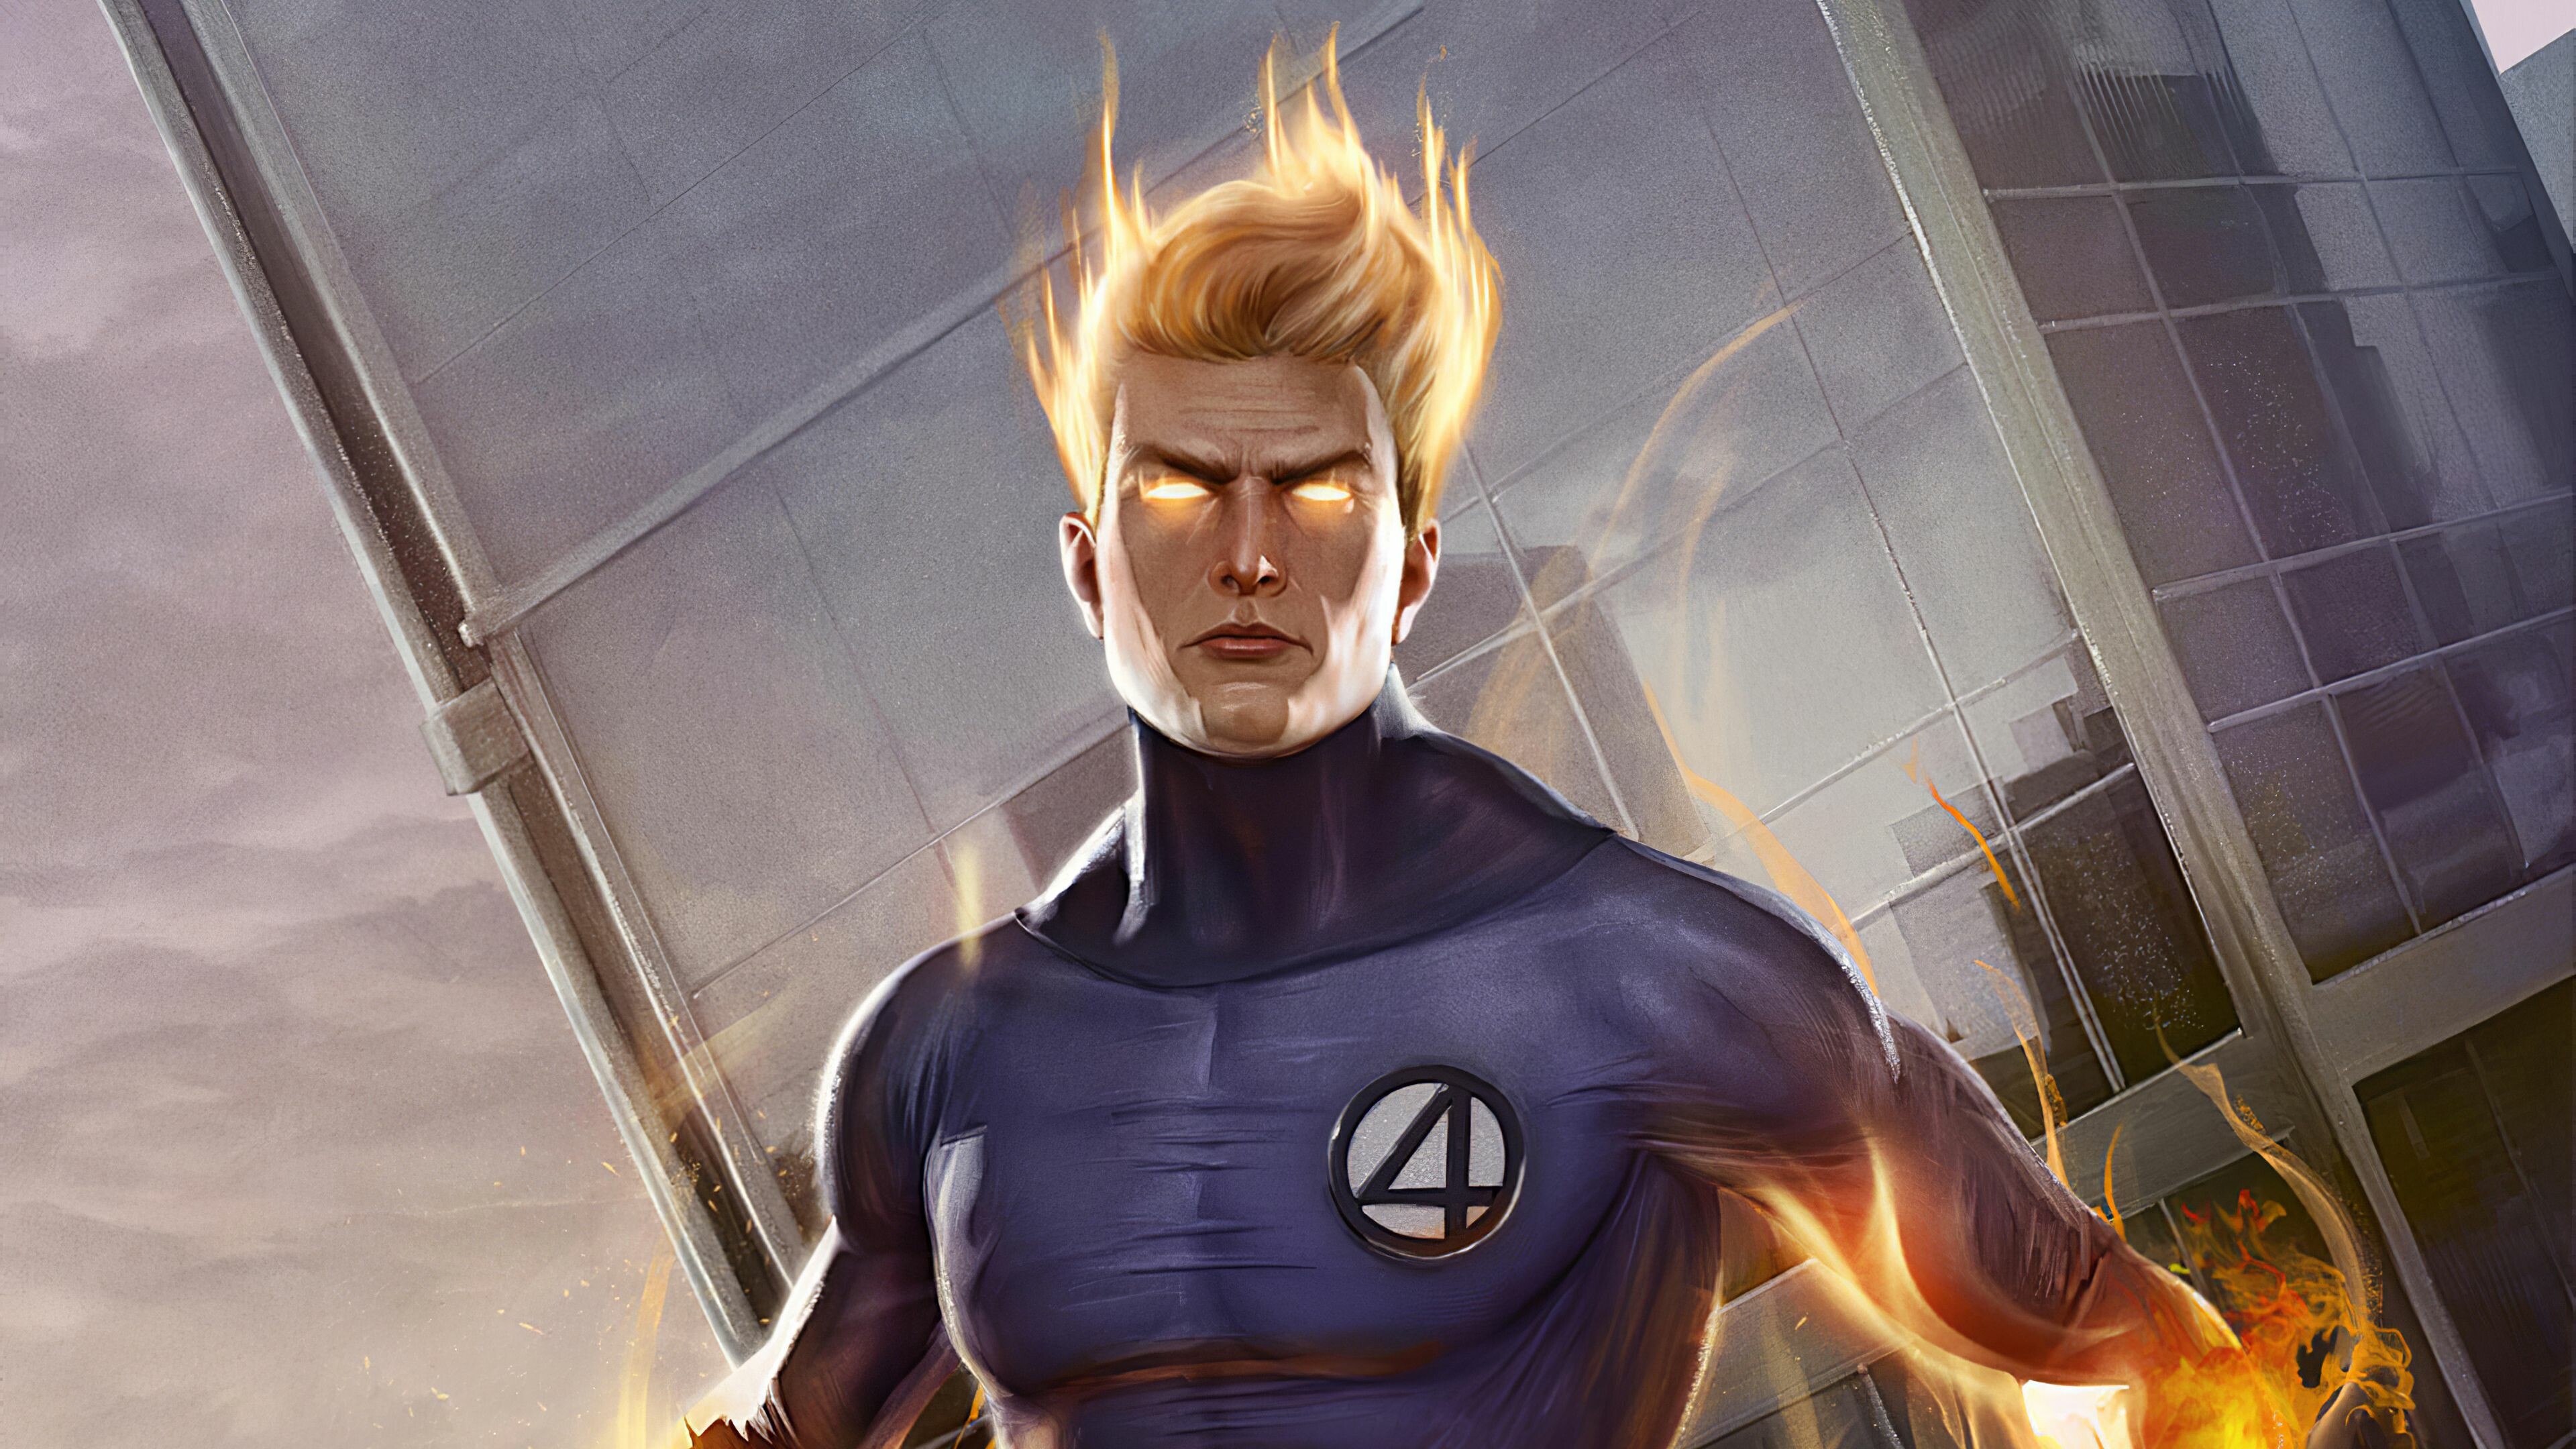 Human Torch: A superhero appearing in American comic books published by Marvel Comics. 3840x2160 4K Wallpaper.